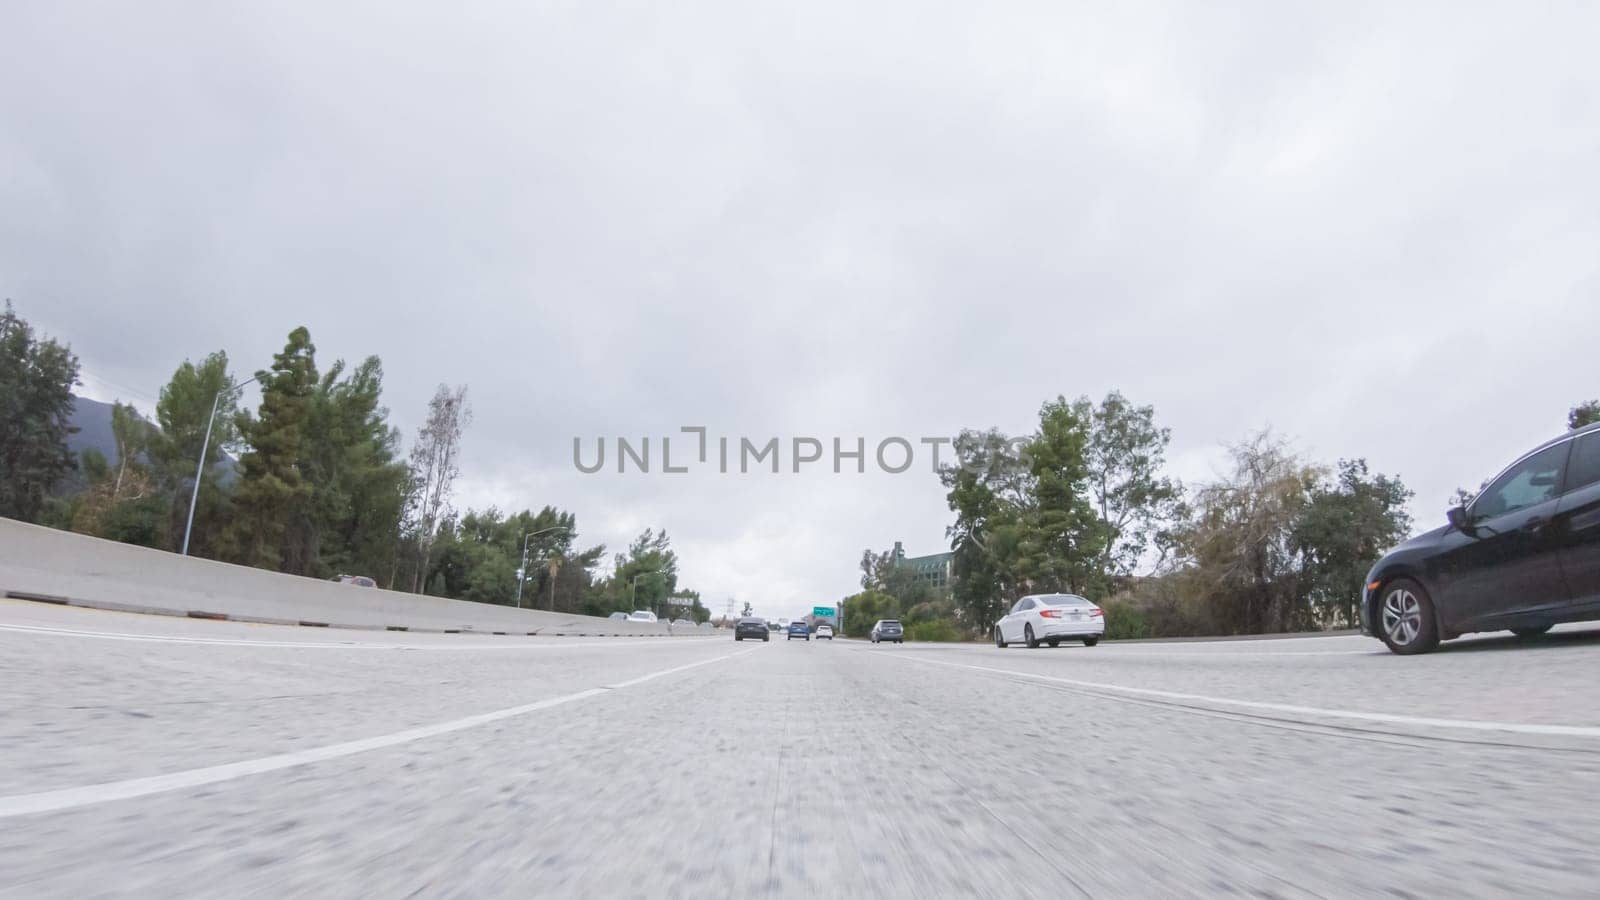 Rainy Winter Drive on HWY 134, Los Angeles by arinahabich